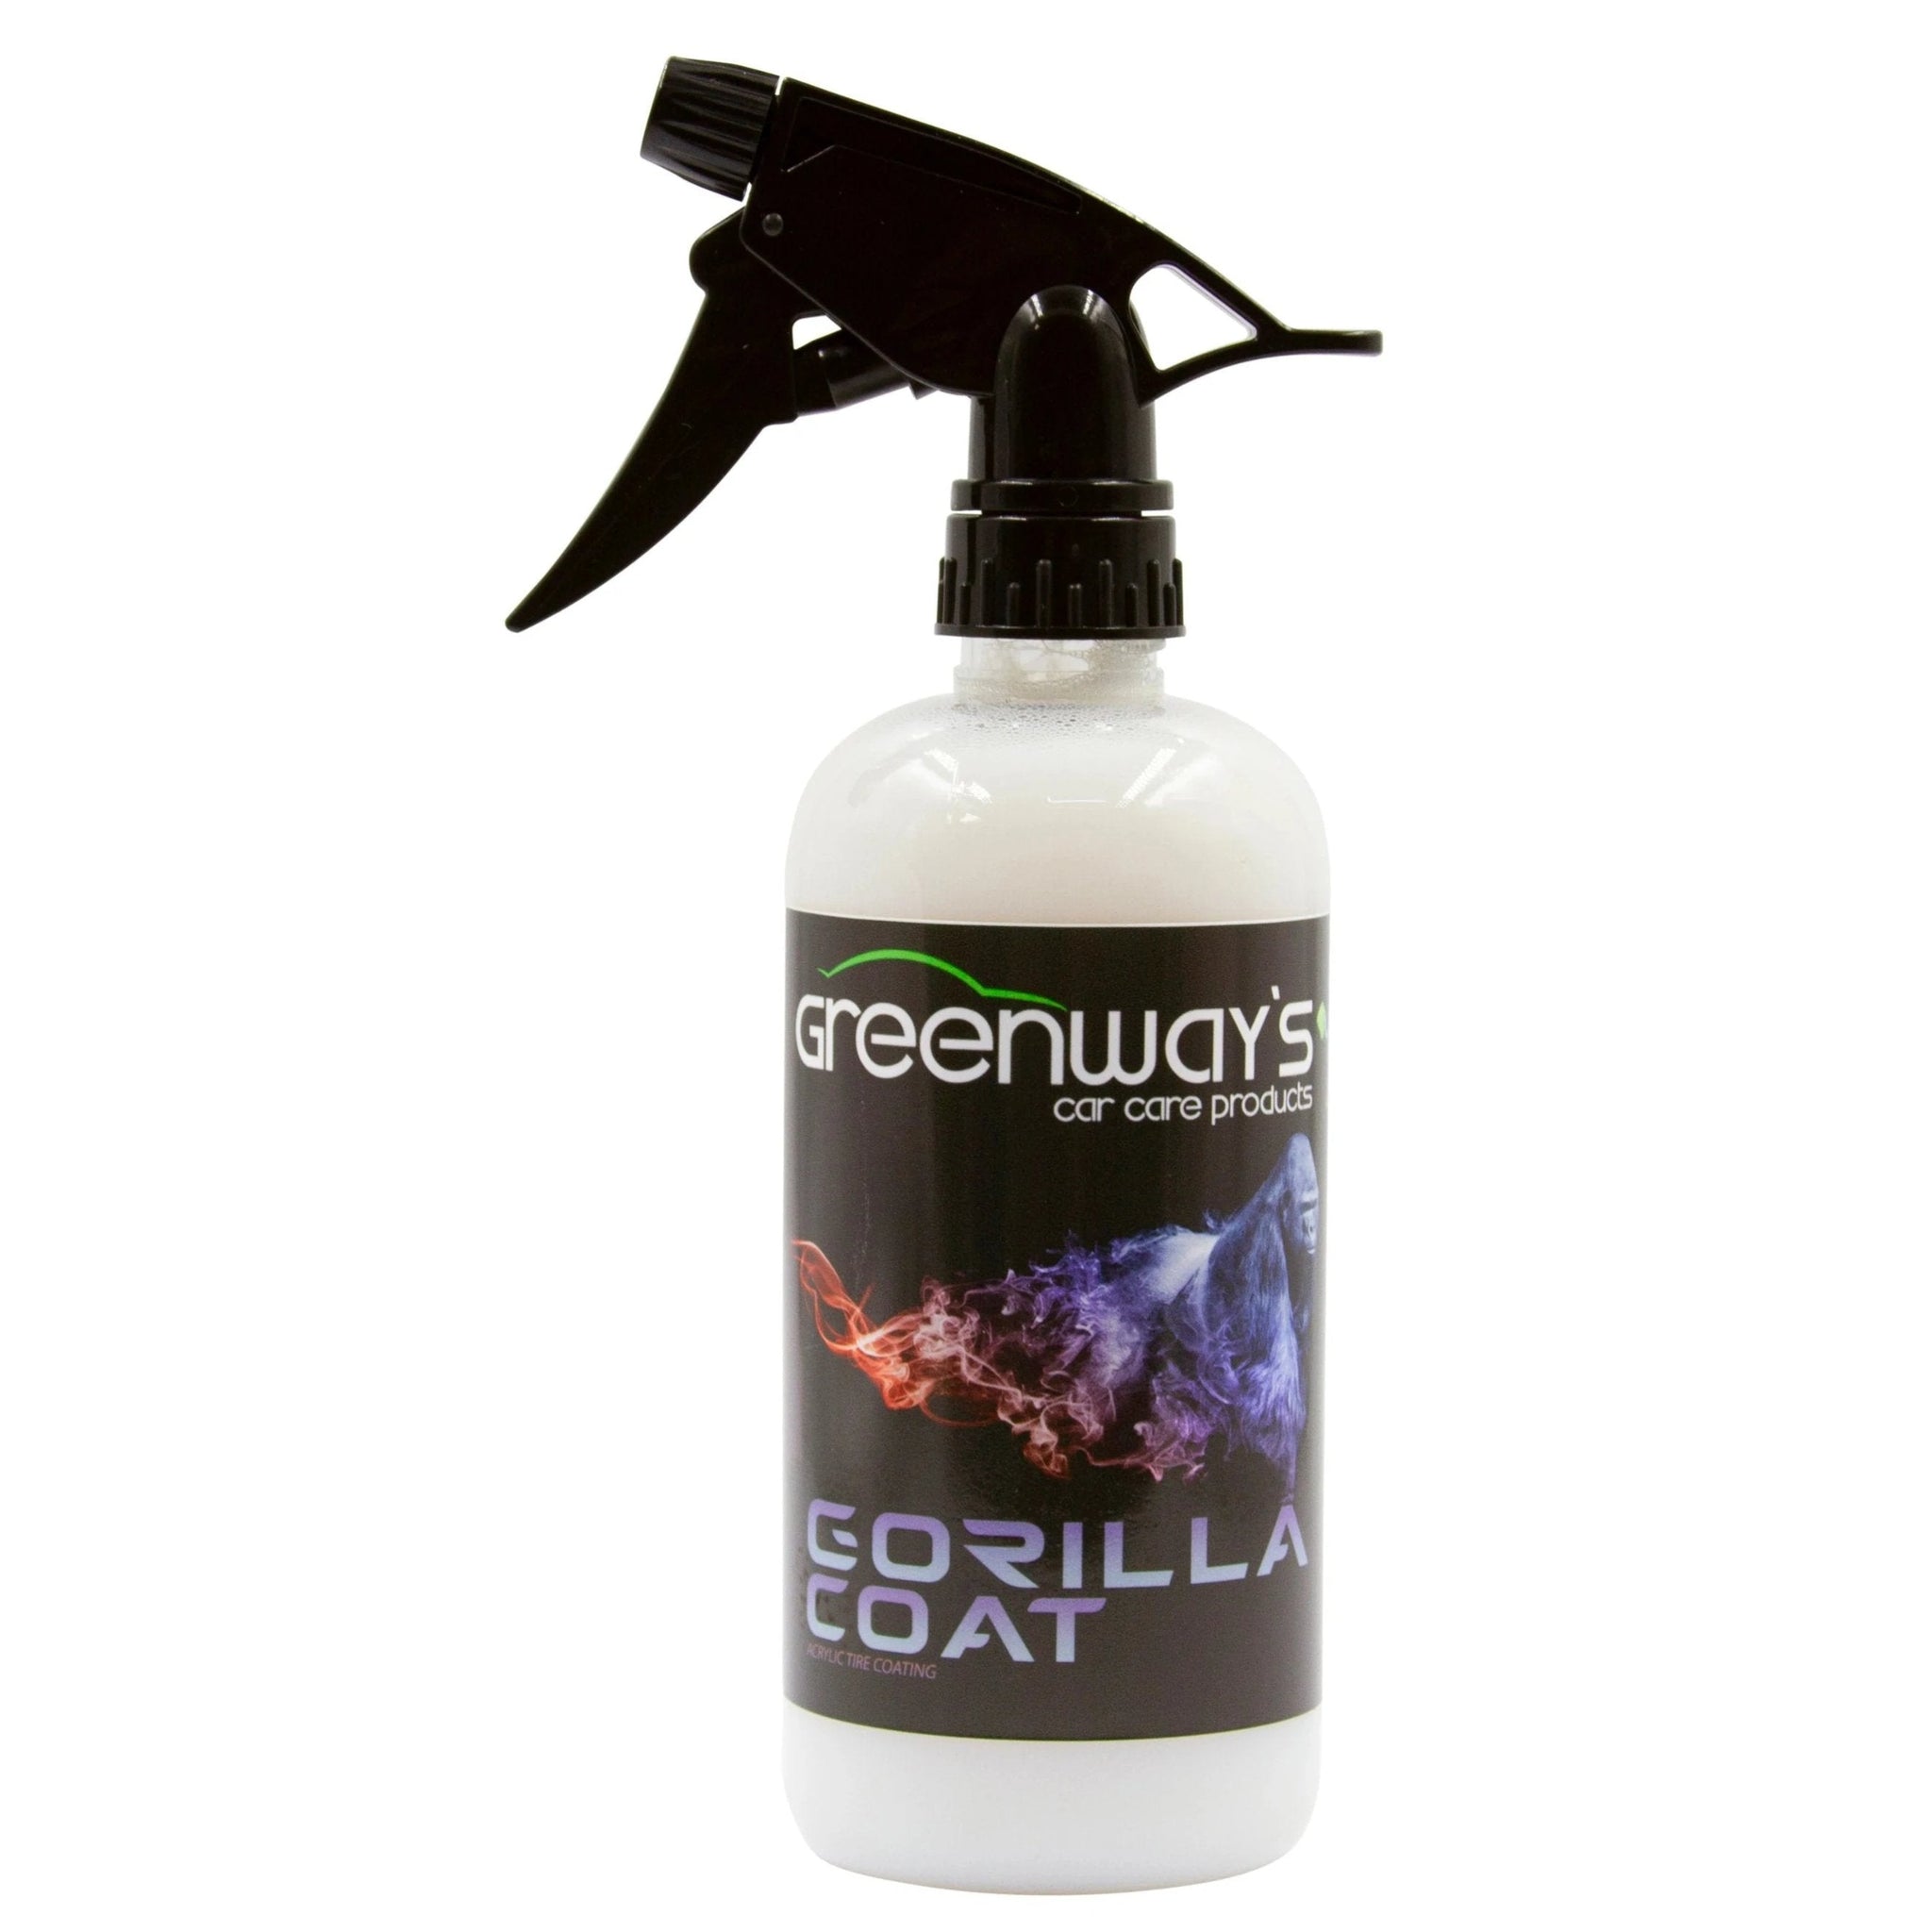 Greenway’s Car Care Products Gorilla Coat, semi-permanent, hydrophobic, satin or high gloss acrylic tire shine coating, 16 ounces.